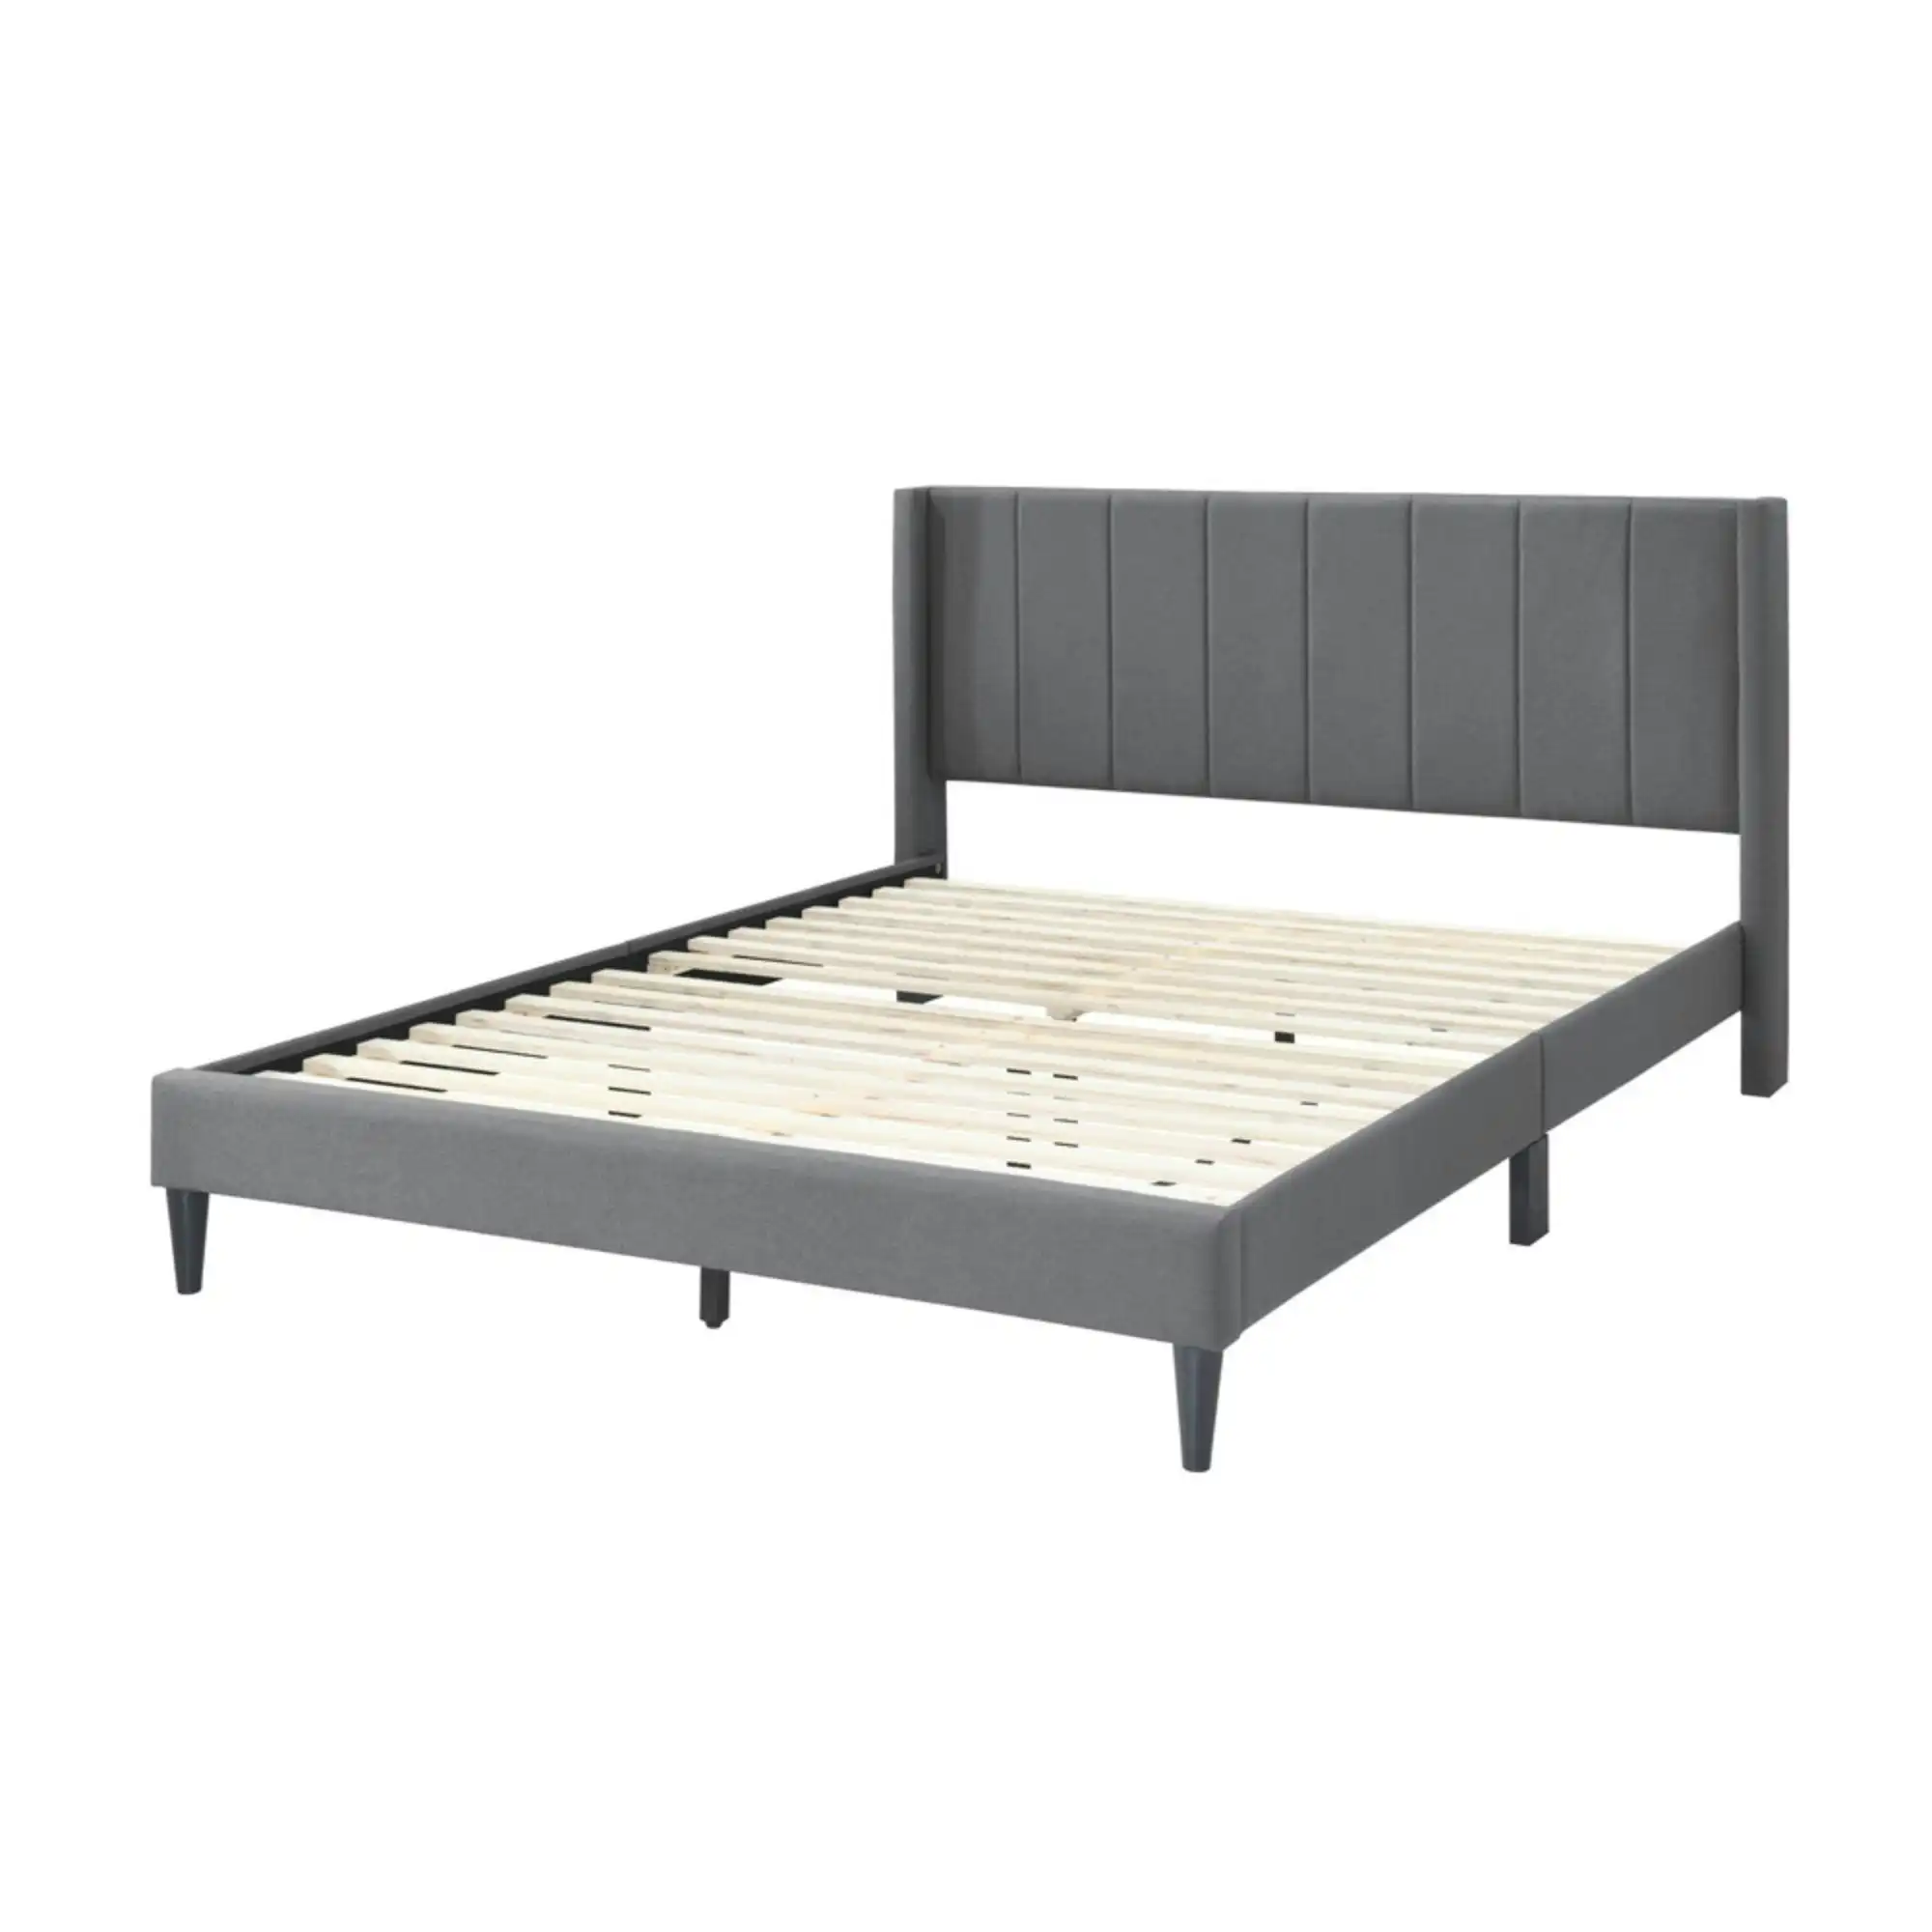 Samson Queen Bed Frame Charcoal